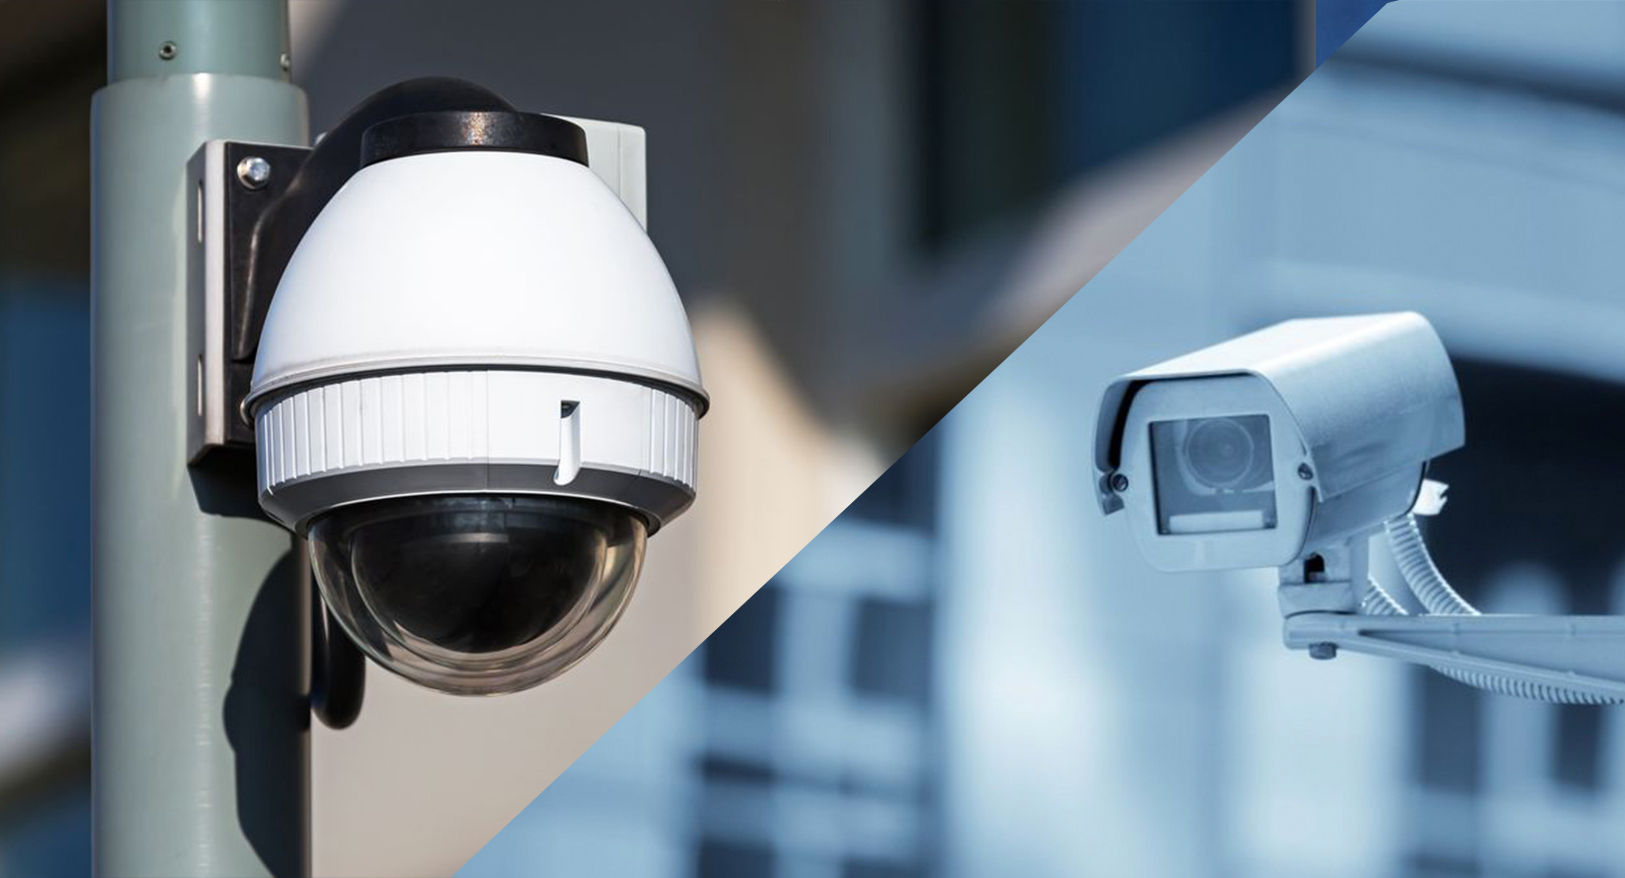 CCTV Vs. IP Cameras: Which Is Better?